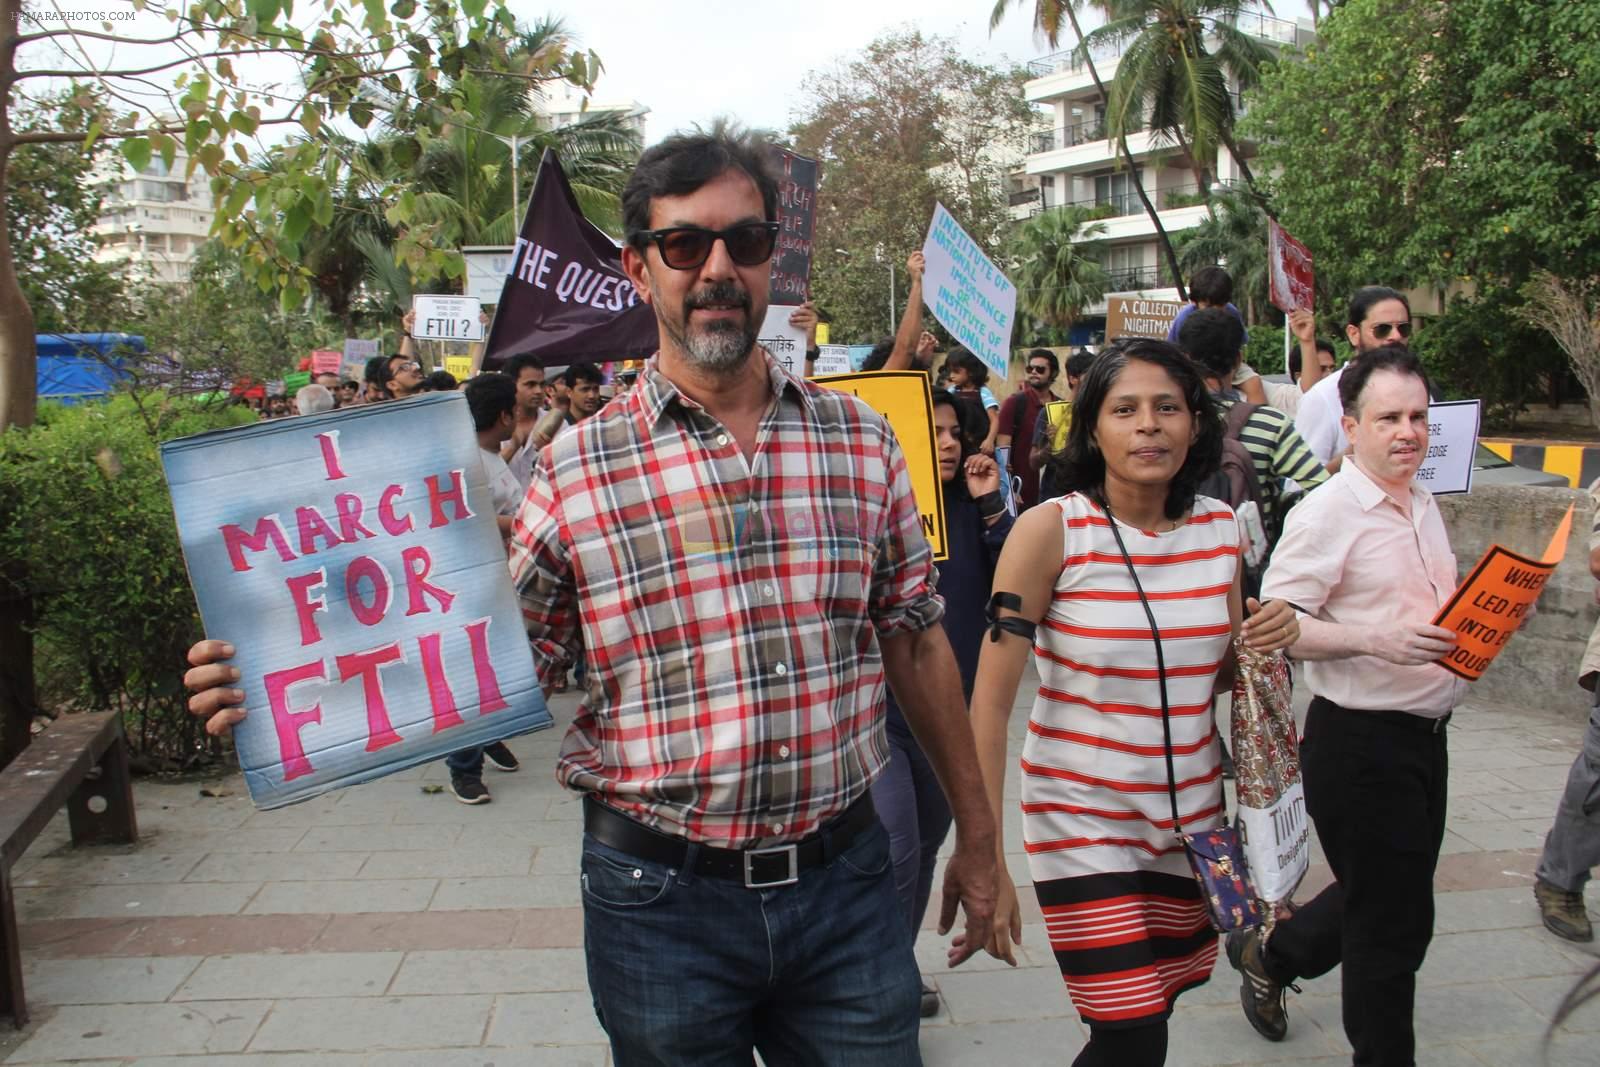 Rajat Kapoor supports the FTII cause and joins the protest at carter road on 2nd July 2015